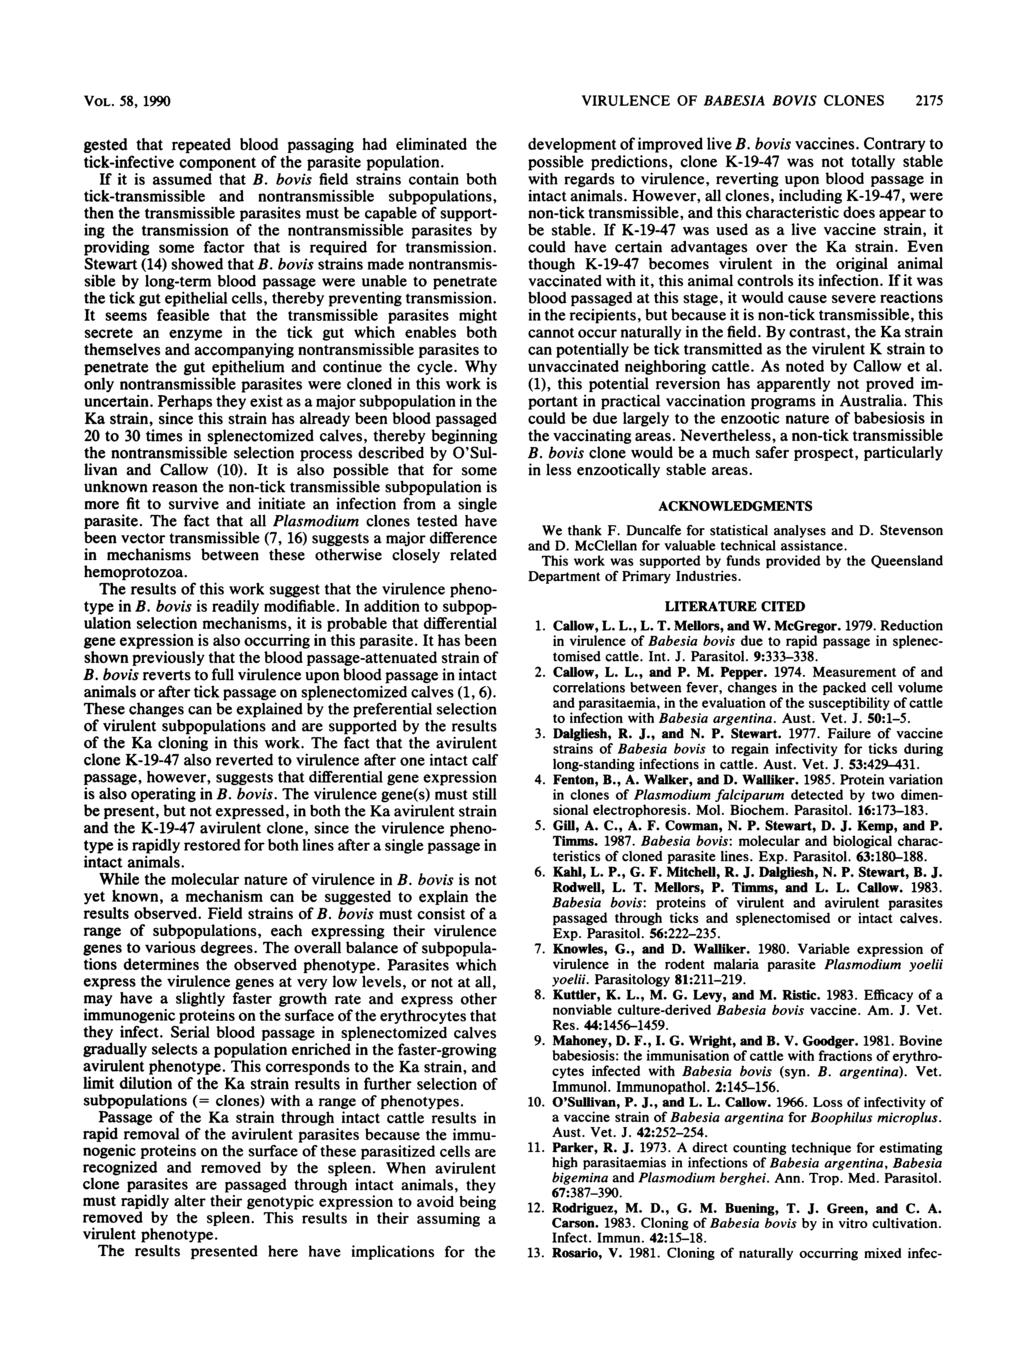 VOL. 58, 1990 gested that repeated blood passaging had eliminated the tick-infective component of the parasite population. If it is assumed that B.